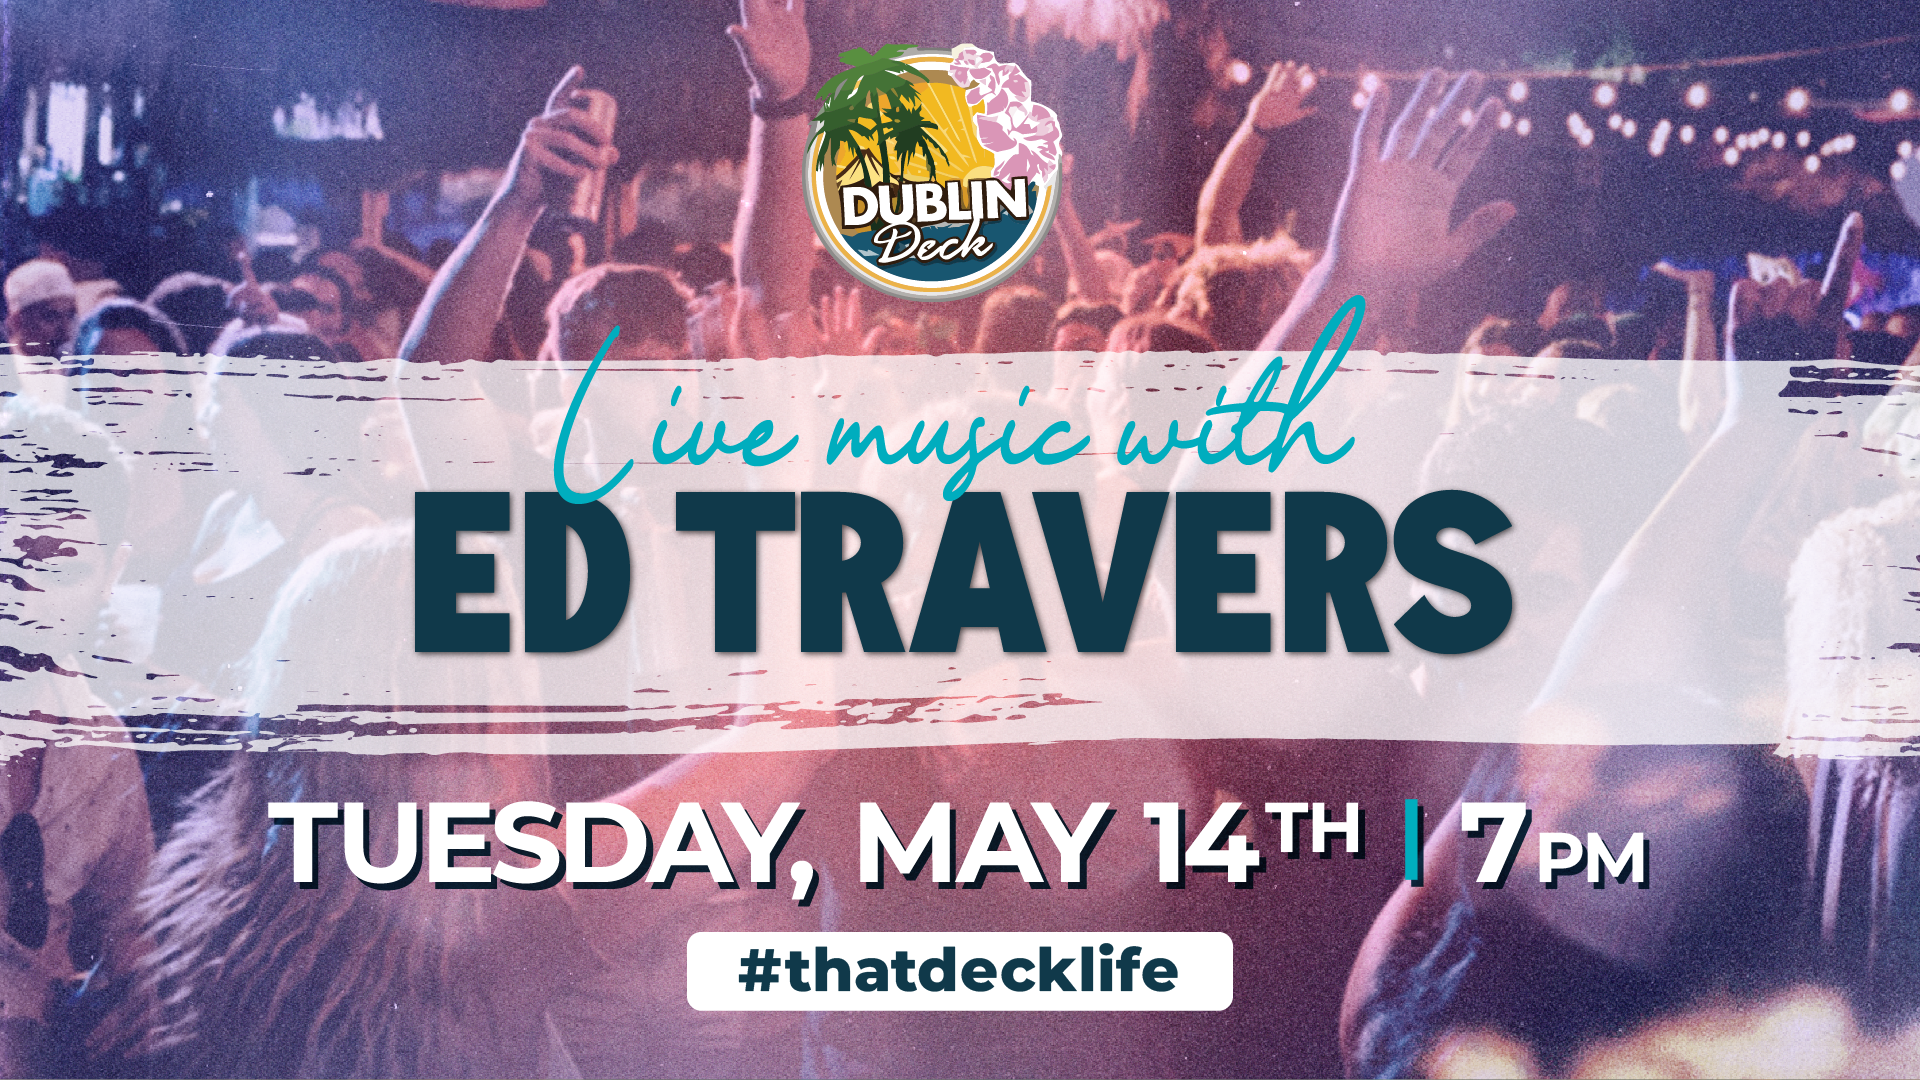 flyer for live music by ed travers on may 14 at 7pm